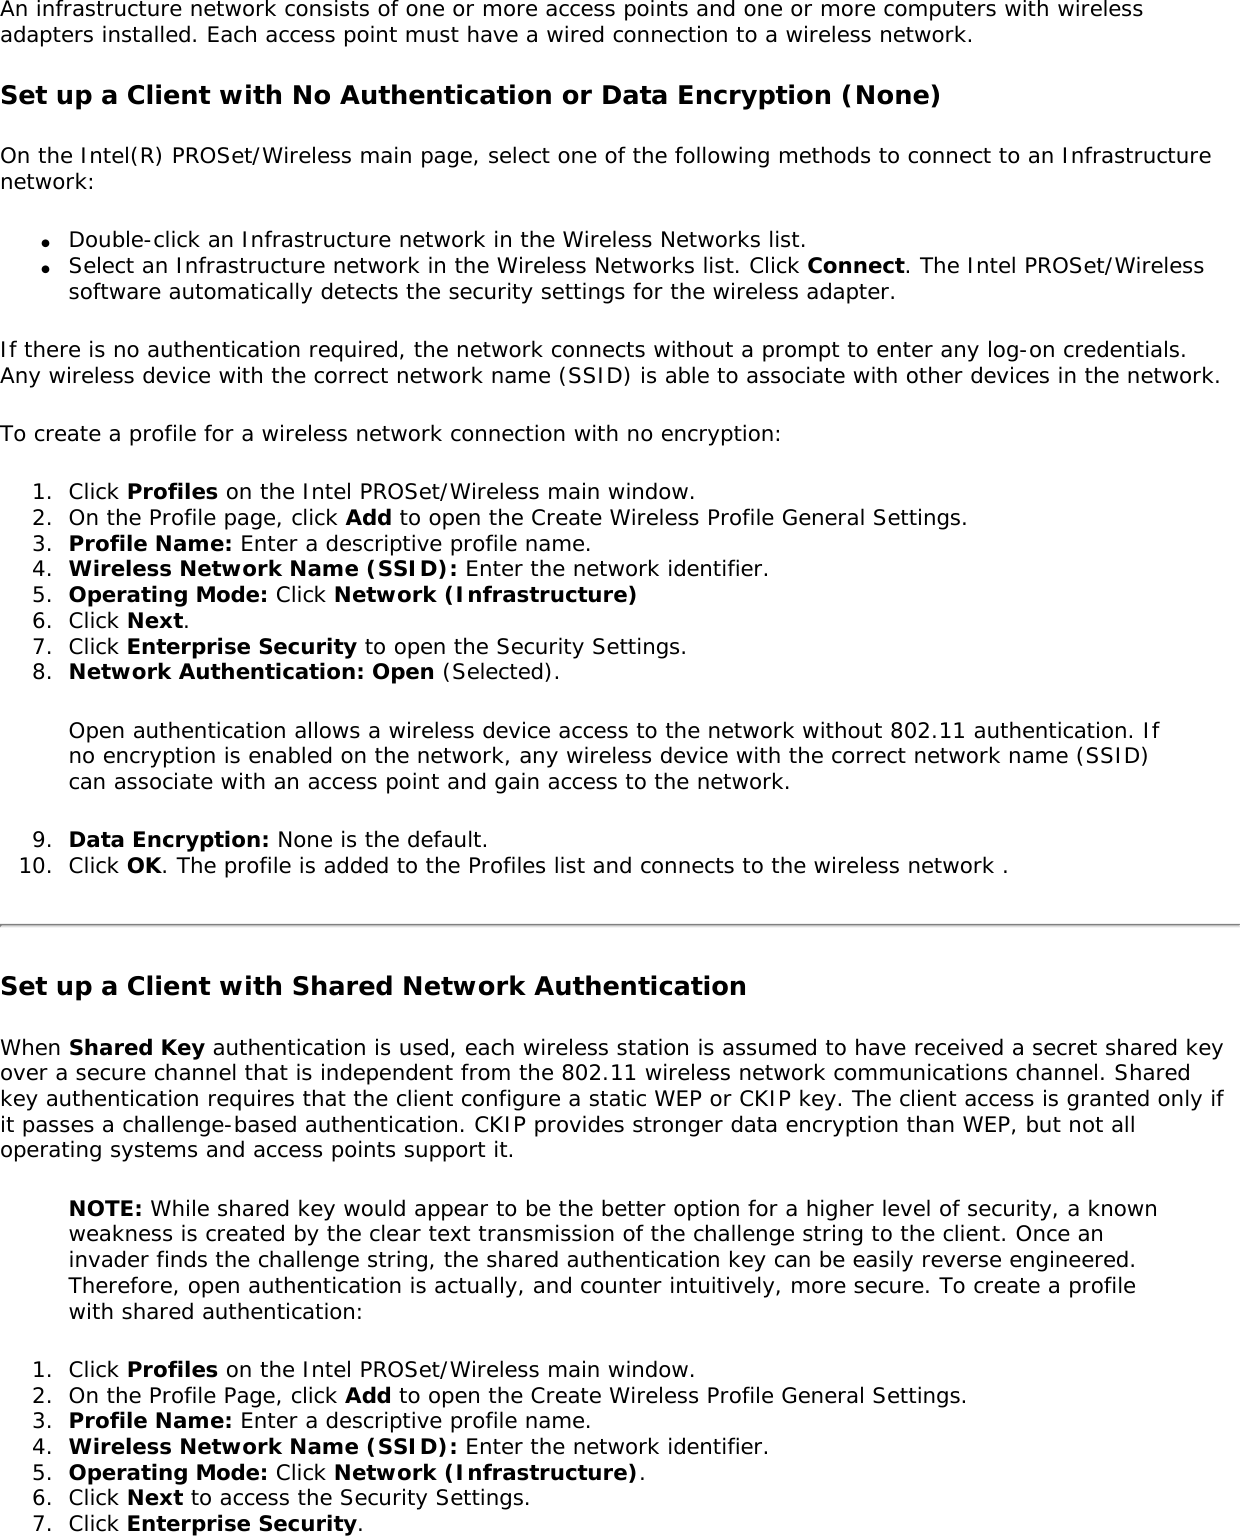 An infrastructure network consists of one or more access points and one or more computers with wireless adapters installed. Each access point must have a wired connection to a wireless network. Set up a Client with No Authentication or Data Encryption (None) On the Intel(R) PROSet/Wireless main page, select one of the following methods to connect to an Infrastructure network: ●     Double-click an Infrastructure network in the Wireless Networks list. ●     Select an Infrastructure network in the Wireless Networks list. Click Connect. The Intel PROSet/Wireless software automatically detects the security settings for the wireless adapter. If there is no authentication required, the network connects without a prompt to enter any log-on credentials. Any wireless device with the correct network name (SSID) is able to associate with other devices in the network. To create a profile for a wireless network connection with no encryption: 1.  Click Profiles on the Intel PROSet/Wireless main window. 2.  On the Profile page, click Add to open the Create Wireless Profile General Settings. 3.  Profile Name: Enter a descriptive profile name. 4.  Wireless Network Name (SSID): Enter the network identifier. 5.  Operating Mode: Click Network (Infrastructure)6.  Click Next. 7.  Click Enterprise Security to open the Security Settings. 8.  Network Authentication: Open (Selected). Open authentication allows a wireless device access to the network without 802.11 authentication. If no encryption is enabled on the network, any wireless device with the correct network name (SSID) can associate with an access point and gain access to the network. 9.  Data Encryption: None is the default. 10.  Click OK. The profile is added to the Profiles list and connects to the wireless network . Set up a Client with Shared Network AuthenticationWhen Shared Key authentication is used, each wireless station is assumed to have received a secret shared key over a secure channel that is independent from the 802.11 wireless network communications channel. Shared key authentication requires that the client configure a static WEP or CKIP key. The client access is granted only if it passes a challenge-based authentication. CKIP provides stronger data encryption than WEP, but not all operating systems and access points support it. NOTE: While shared key would appear to be the better option for a higher level of security, a known weakness is created by the clear text transmission of the challenge string to the client. Once an invader finds the challenge string, the shared authentication key can be easily reverse engineered. Therefore, open authentication is actually, and counter intuitively, more secure. To create a profile with shared authentication: 1.  Click Profiles on the Intel PROSet/Wireless main window. 2.  On the Profile Page, click Add to open the Create Wireless Profile General Settings.3.  Profile Name: Enter a descriptive profile name.4.  Wireless Network Name (SSID): Enter the network identifier. 5.  Operating Mode: Click Network (Infrastructure). 6.  Click Next to access the Security Settings. 7.  Click Enterprise Security. 